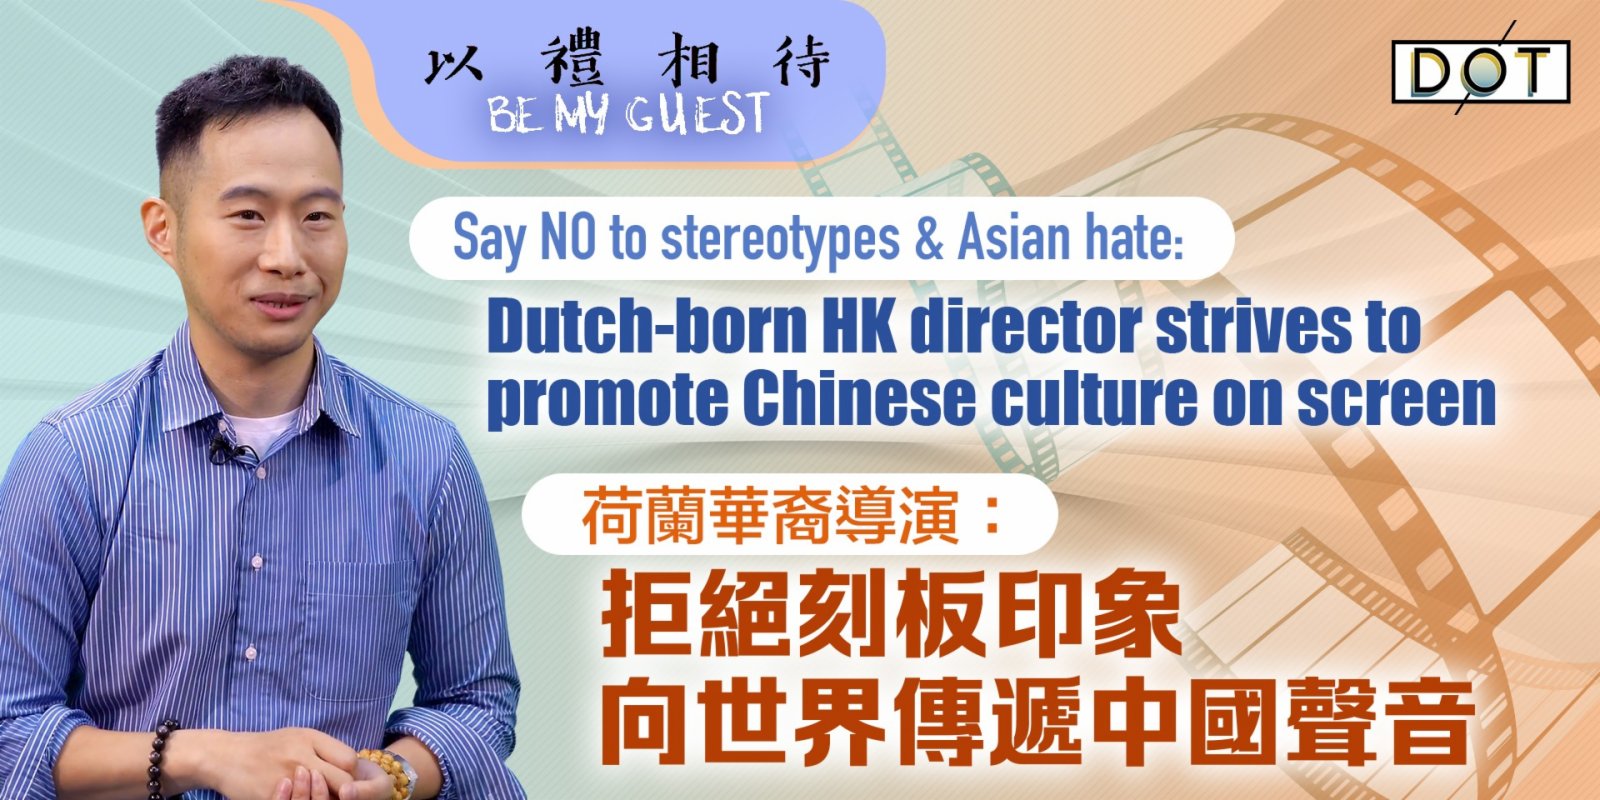 Be My Guest | Say NO to stereotypes & Asian hate: Dutch-born HK director strives to promote Chinese culture on screen